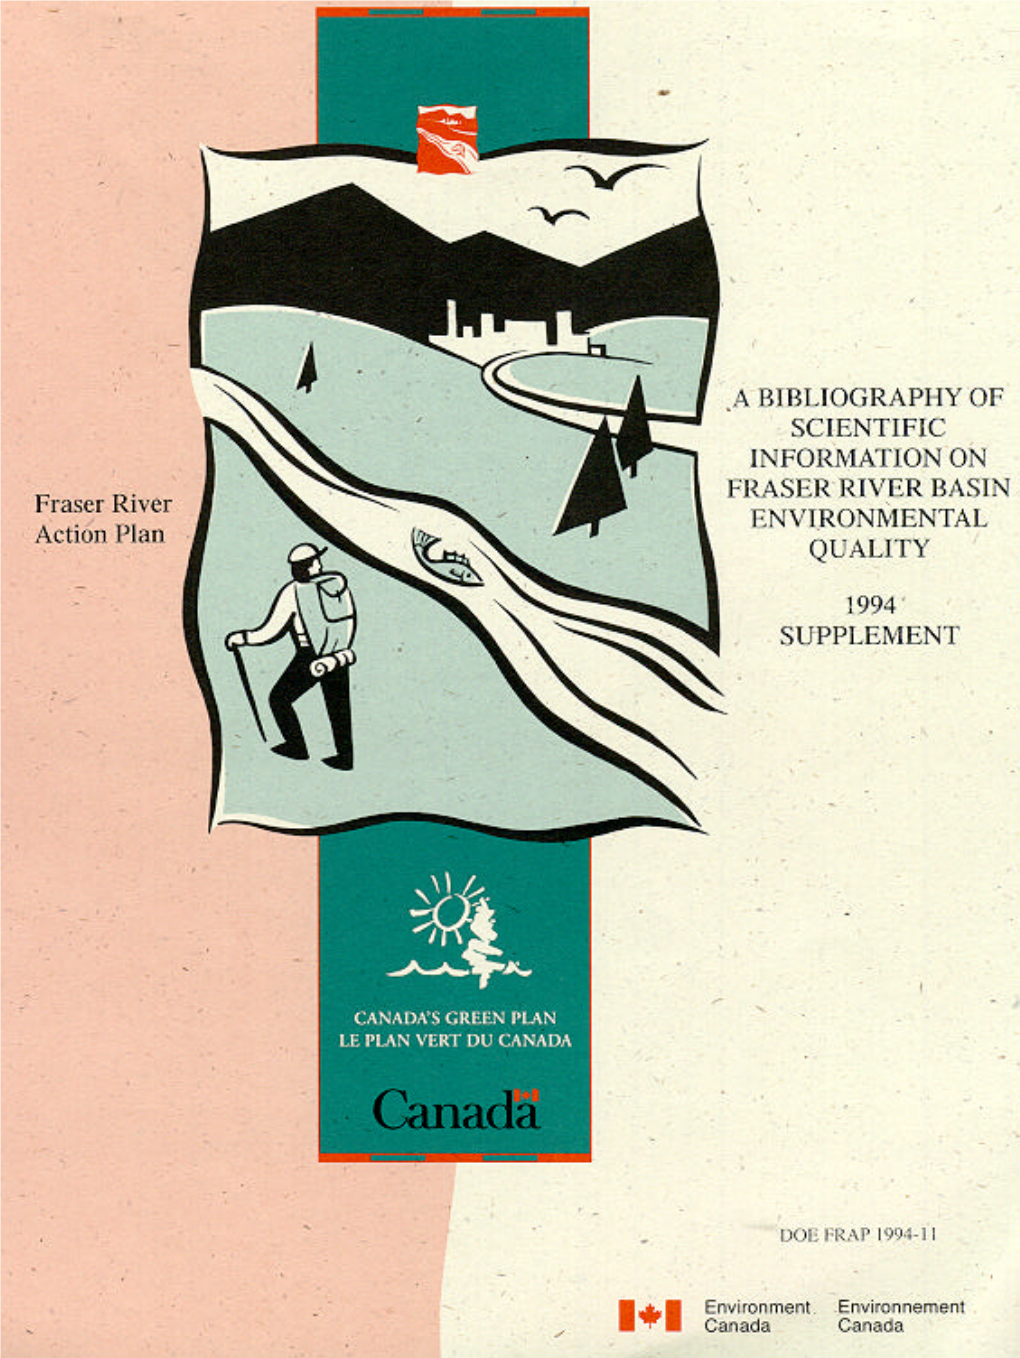 A Bibliography of Scientific Information on Fraser River Basin Environmental Quality